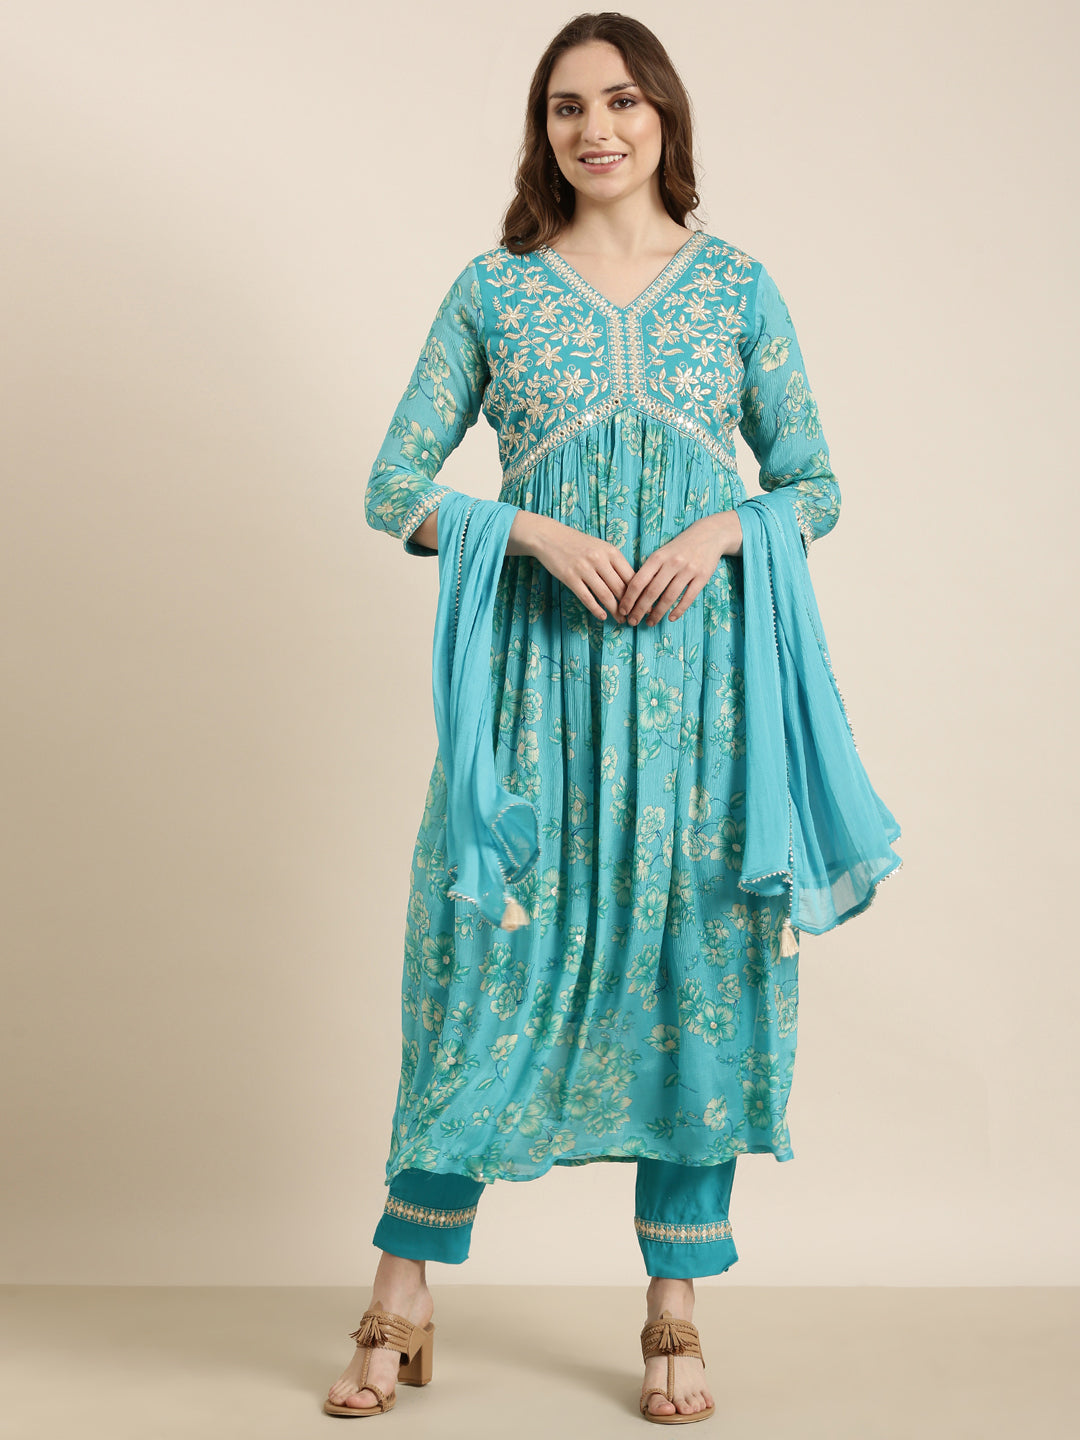 Women Anarkali Blue Floral Kurta and Trousers Set Comes With Dupatta